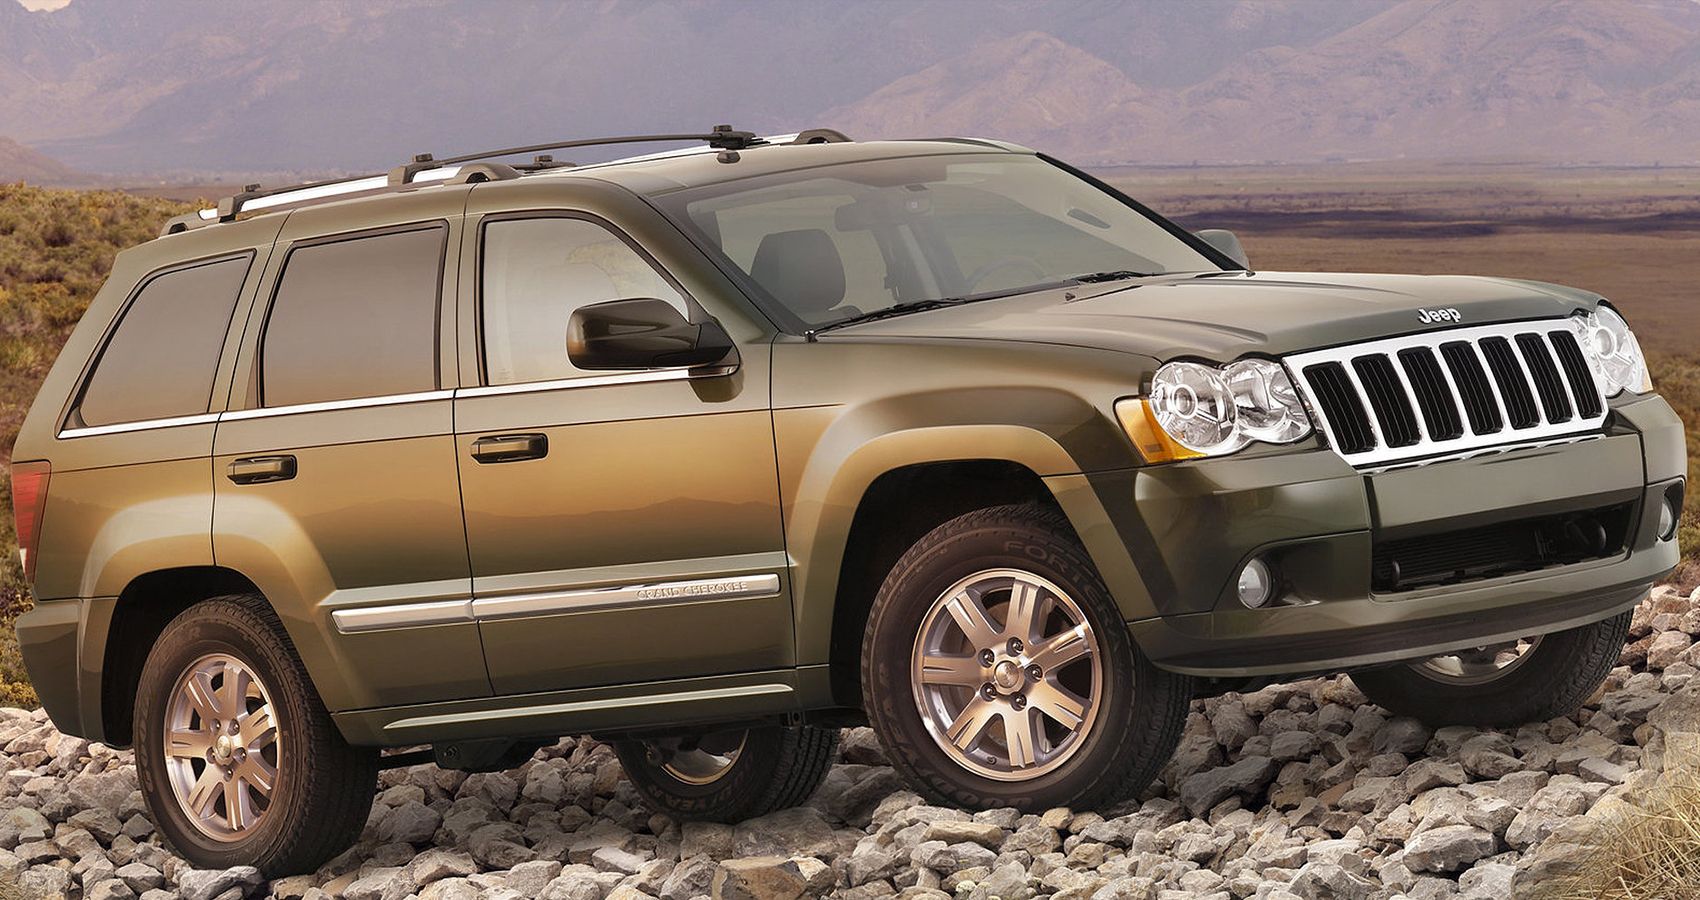 2008 Jeep Grand Cherokee in Green Front View